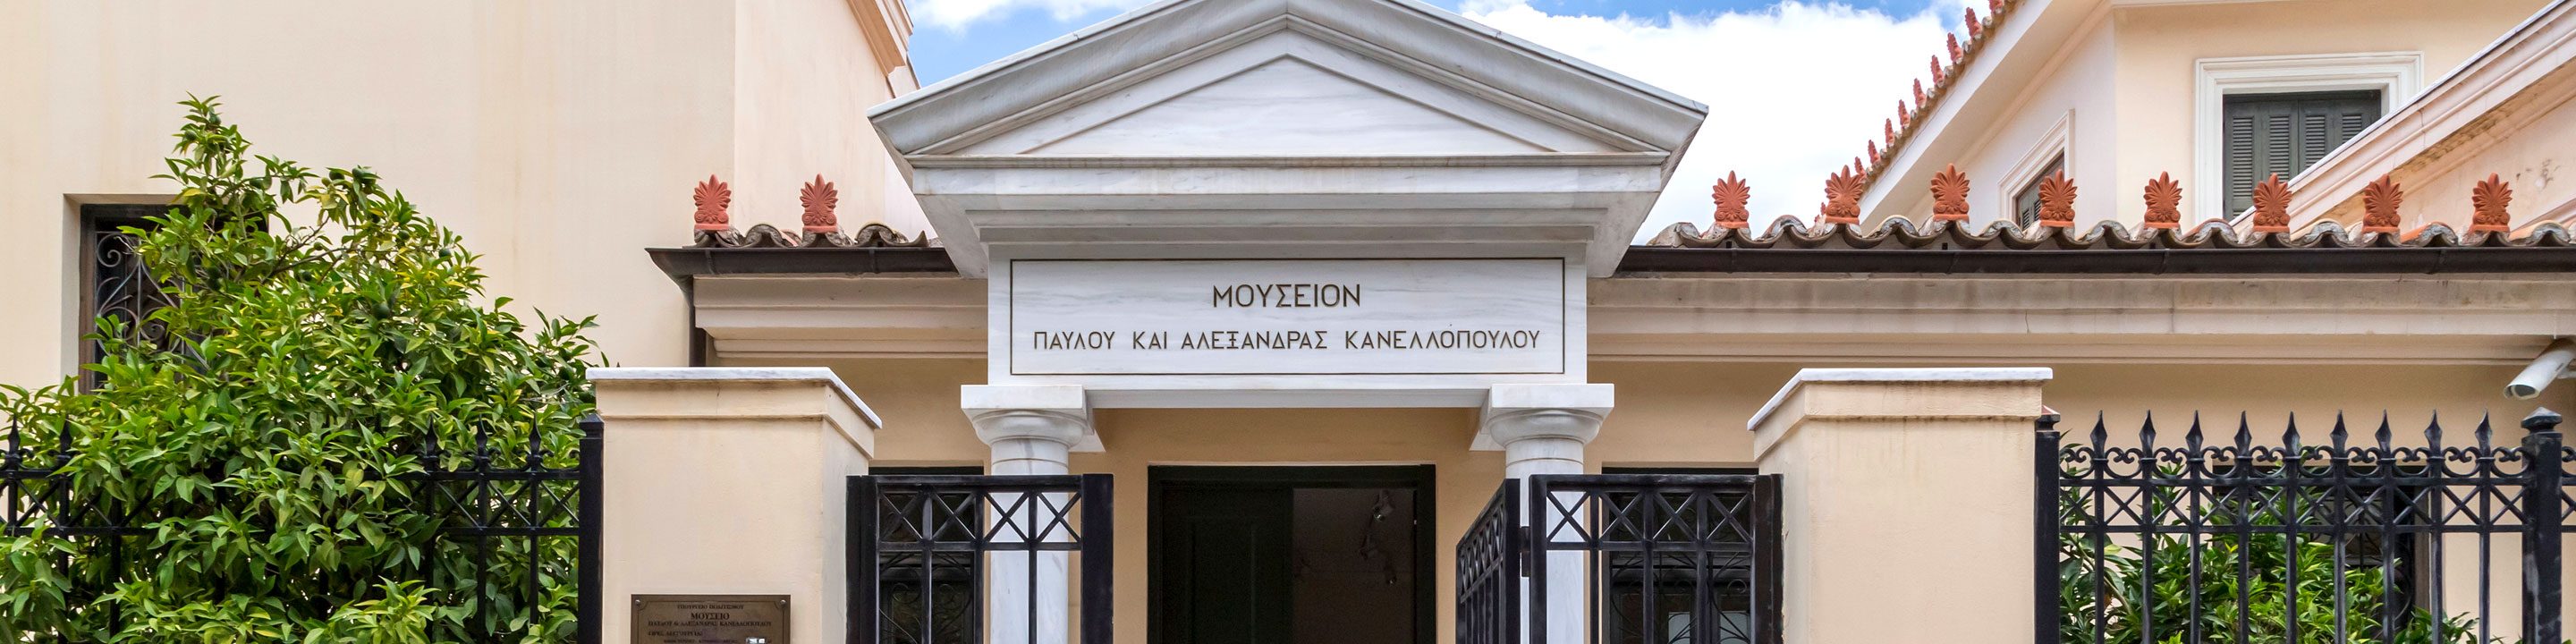 Kanelopoulou Museum in Plaka